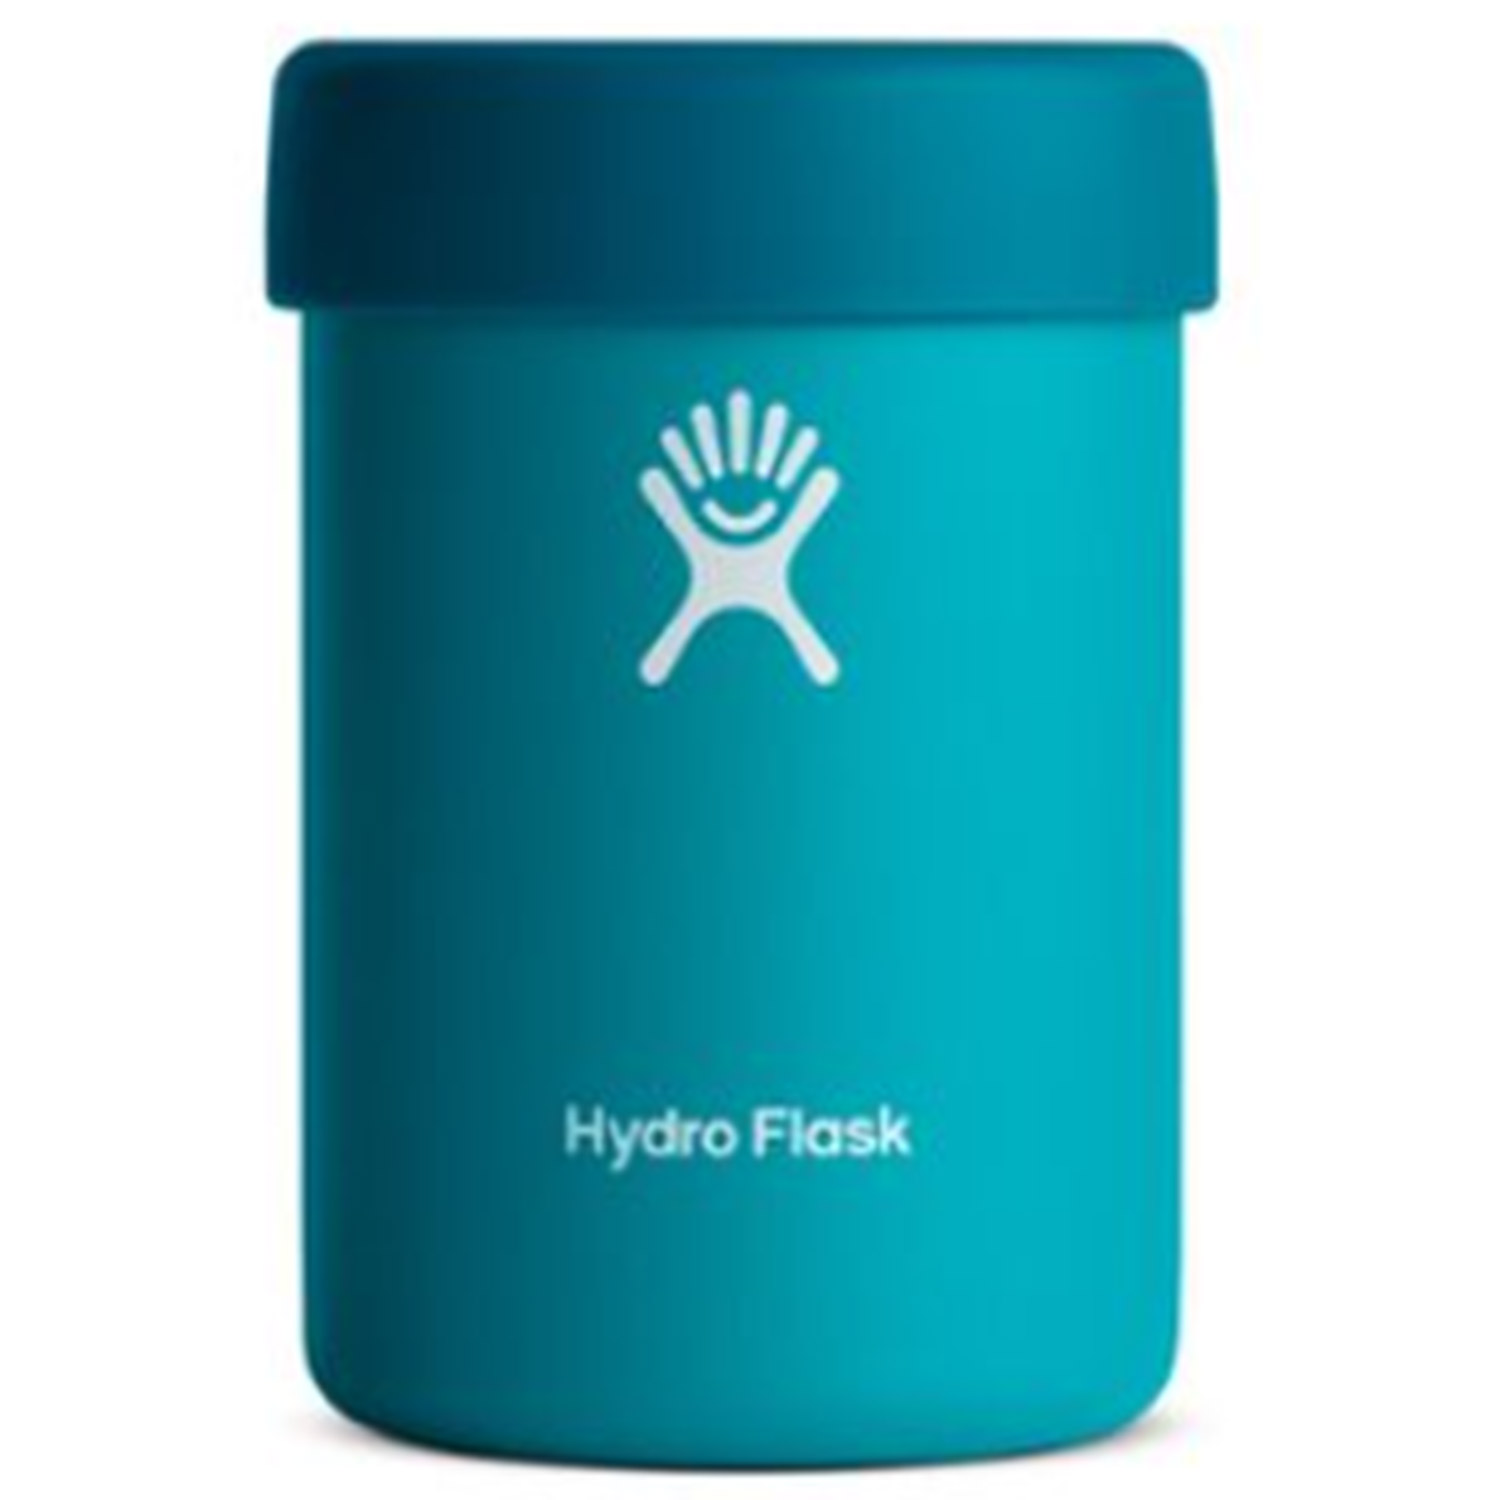 Hydroflask 12oz Can Cooler Cup (choose color) - 810028843530